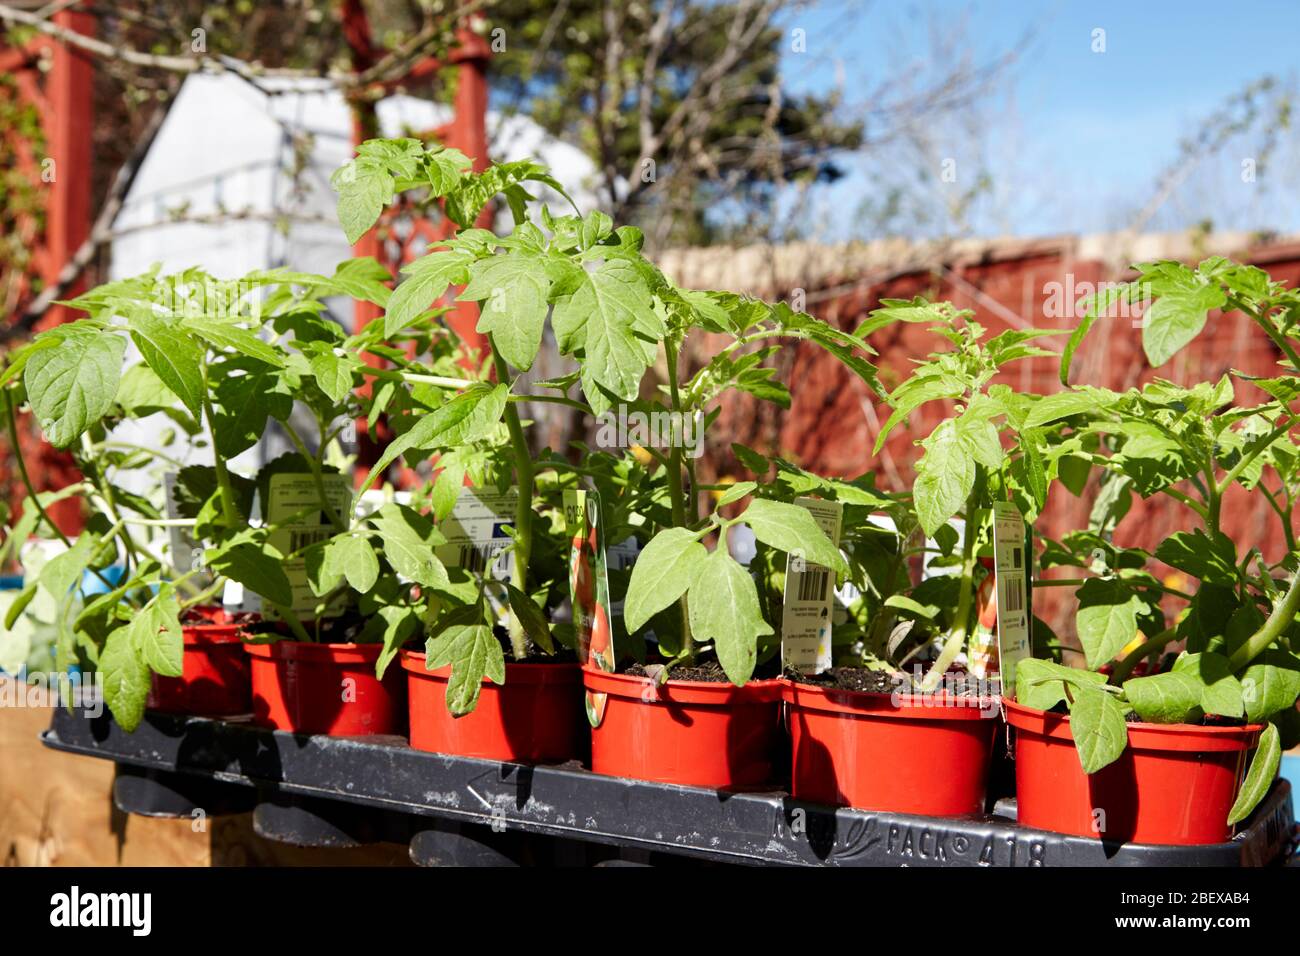 shop bought tomato plants in a garden during coronavirus lockdown for growing veg at home Newtownabbey Northern Ireland UK Stock Photo